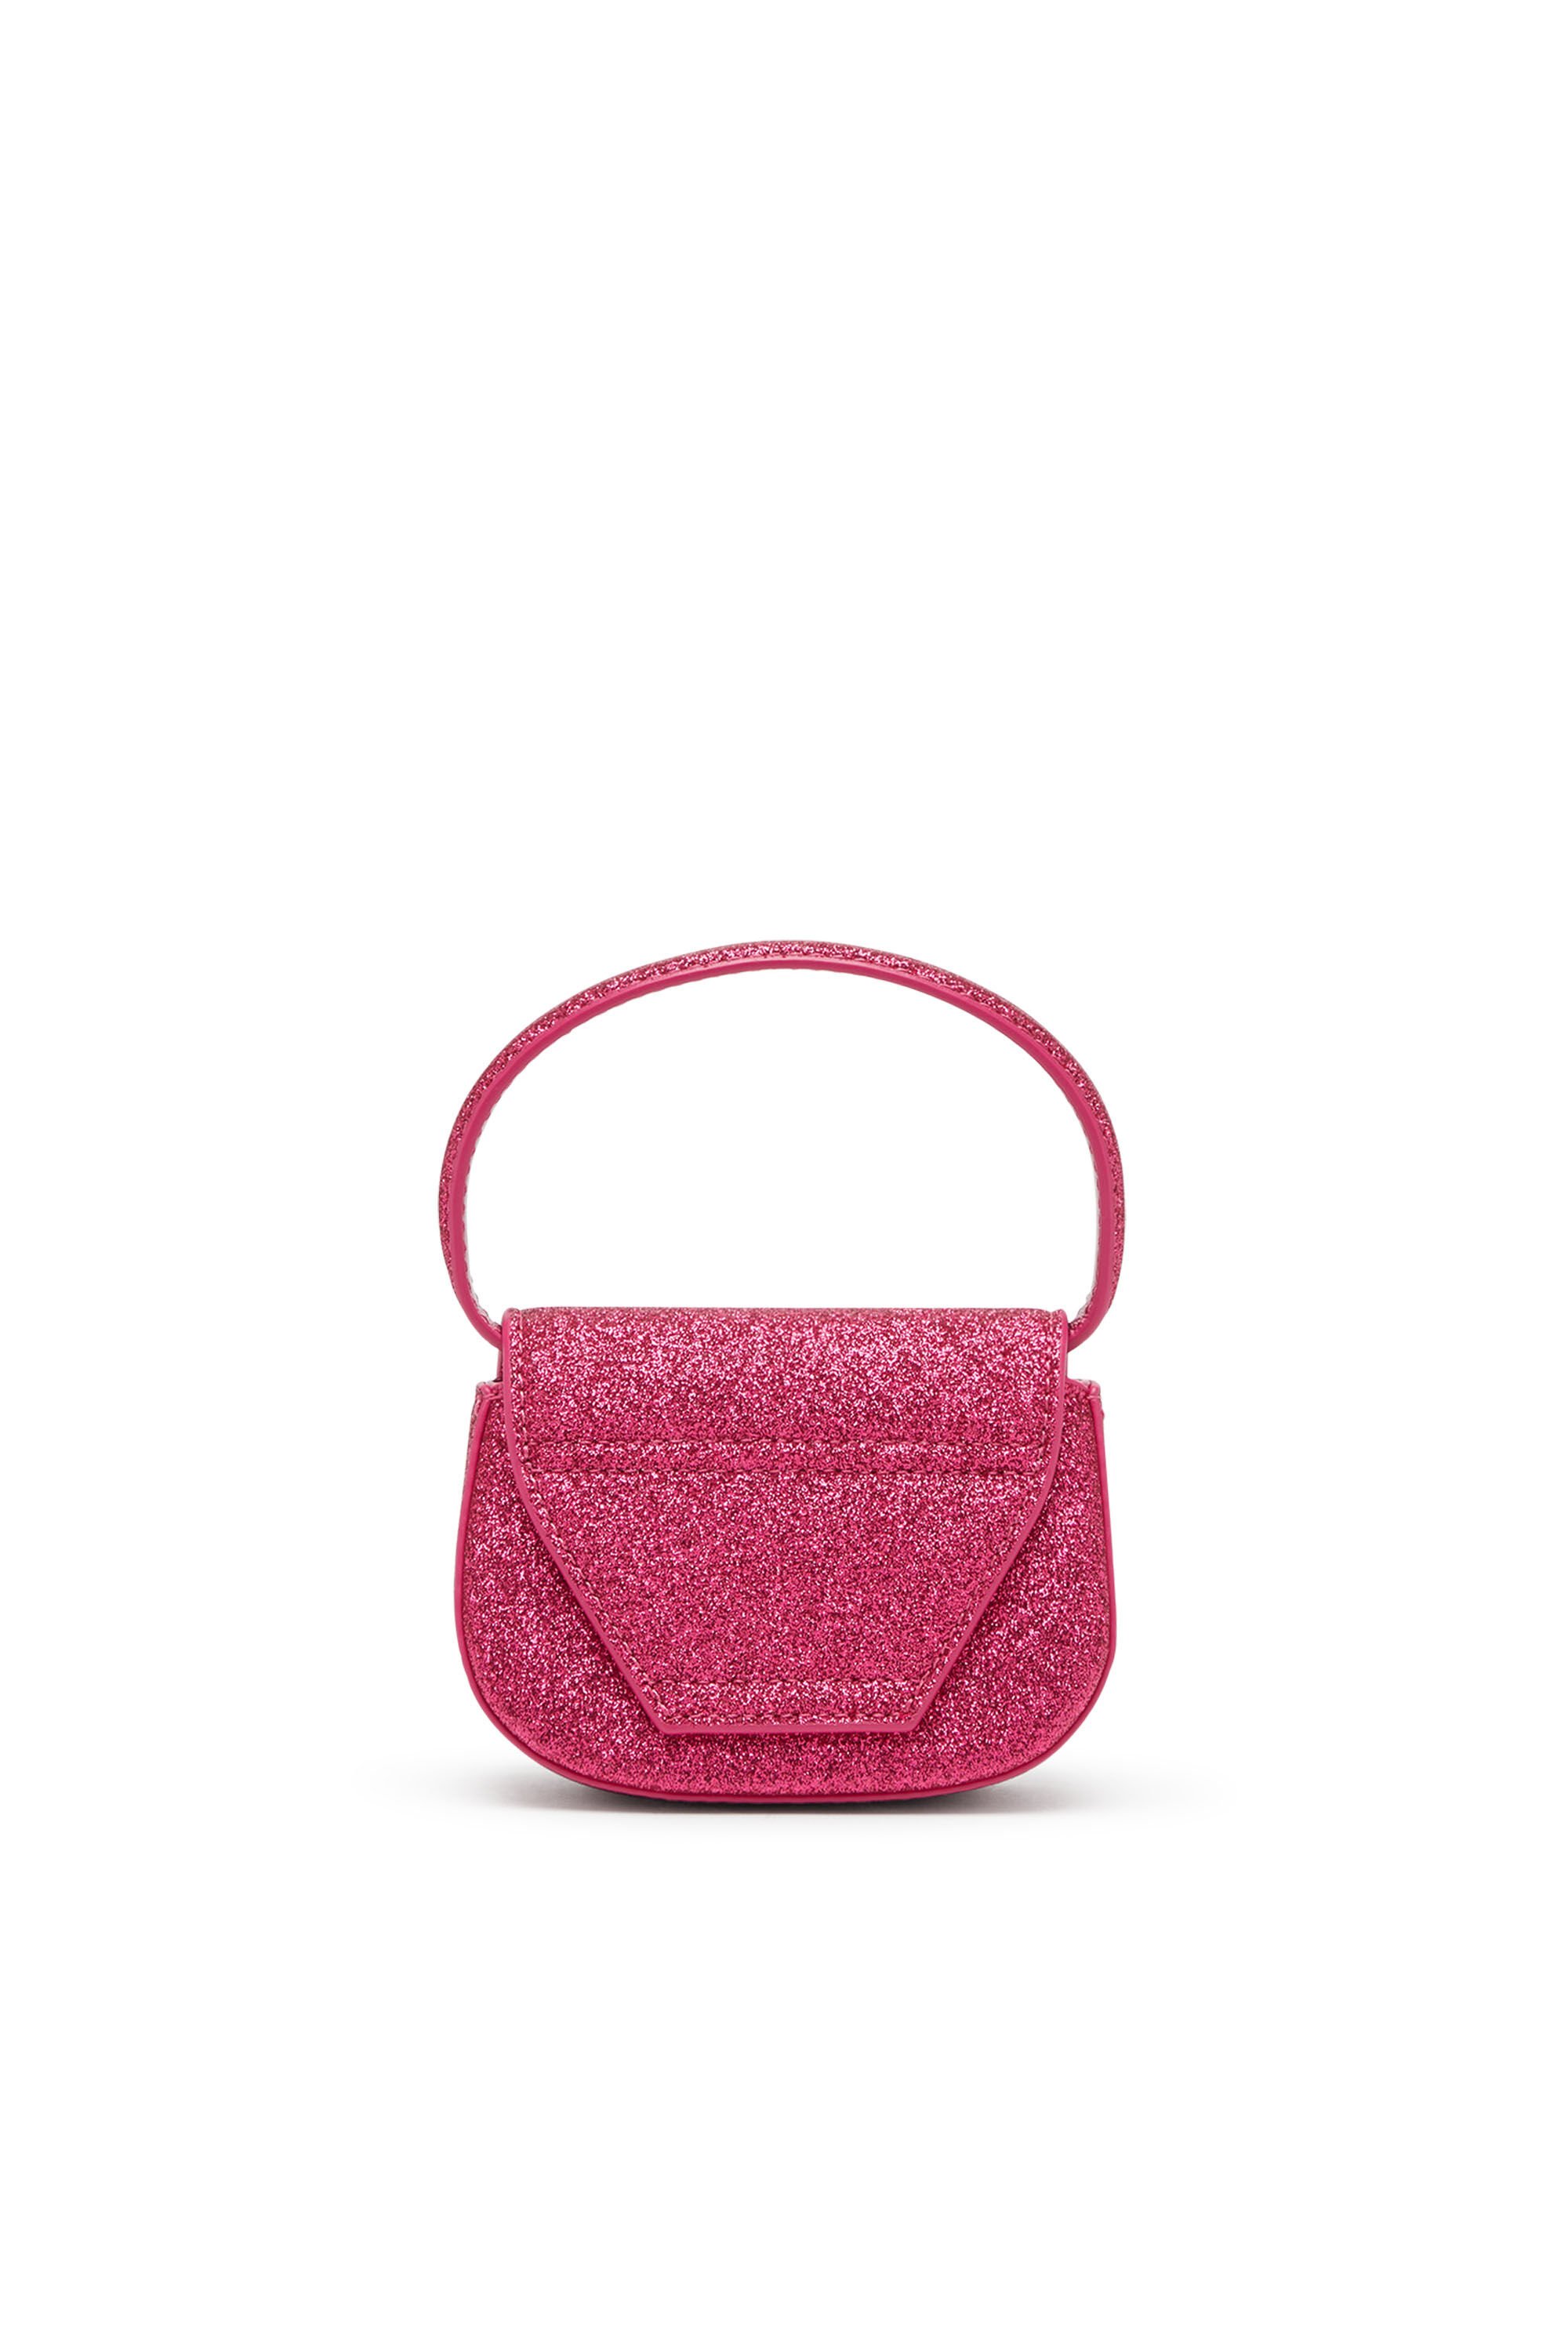 Diesel - 1DR XS, Woman 1DR XS-Iconic mini bag in glitter fabric in Pink - Image 3